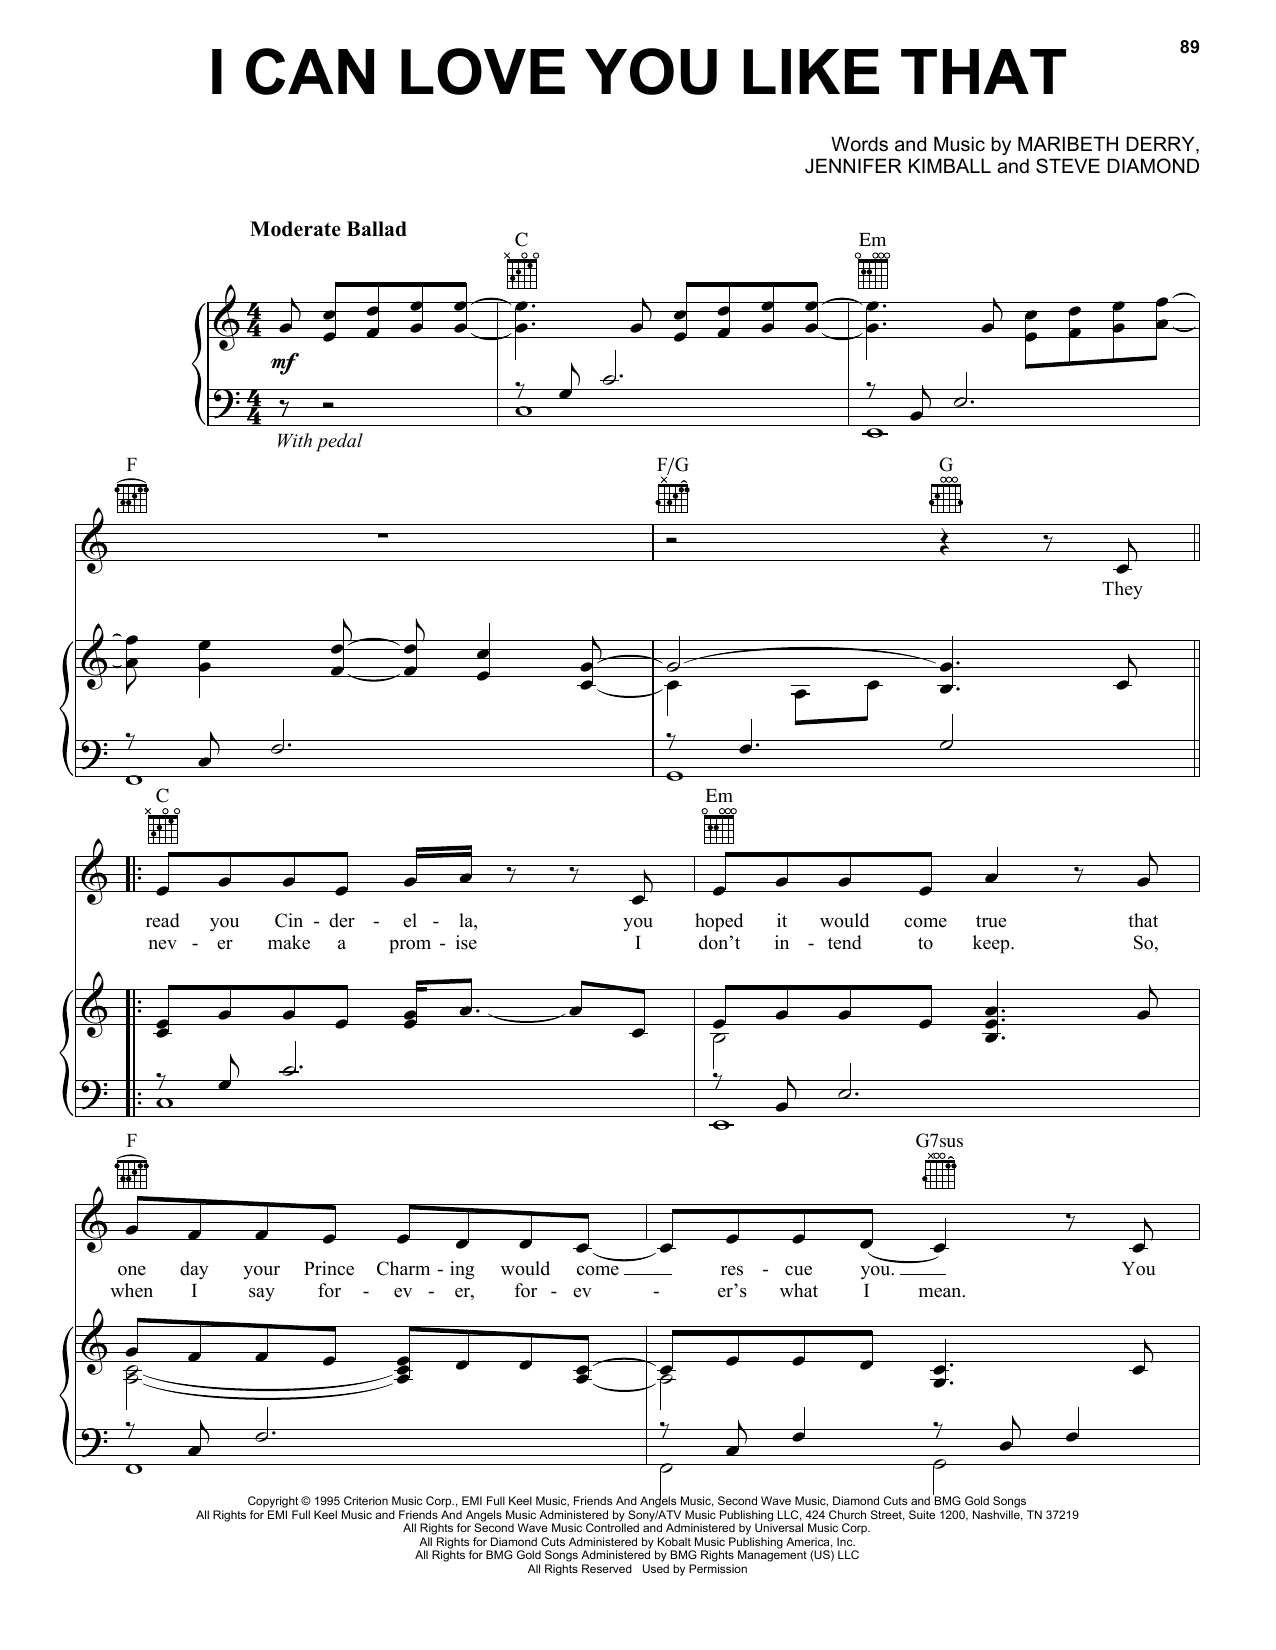 All-4-One I Can Love You Like That sheet music notes and chords. Download Printable PDF.